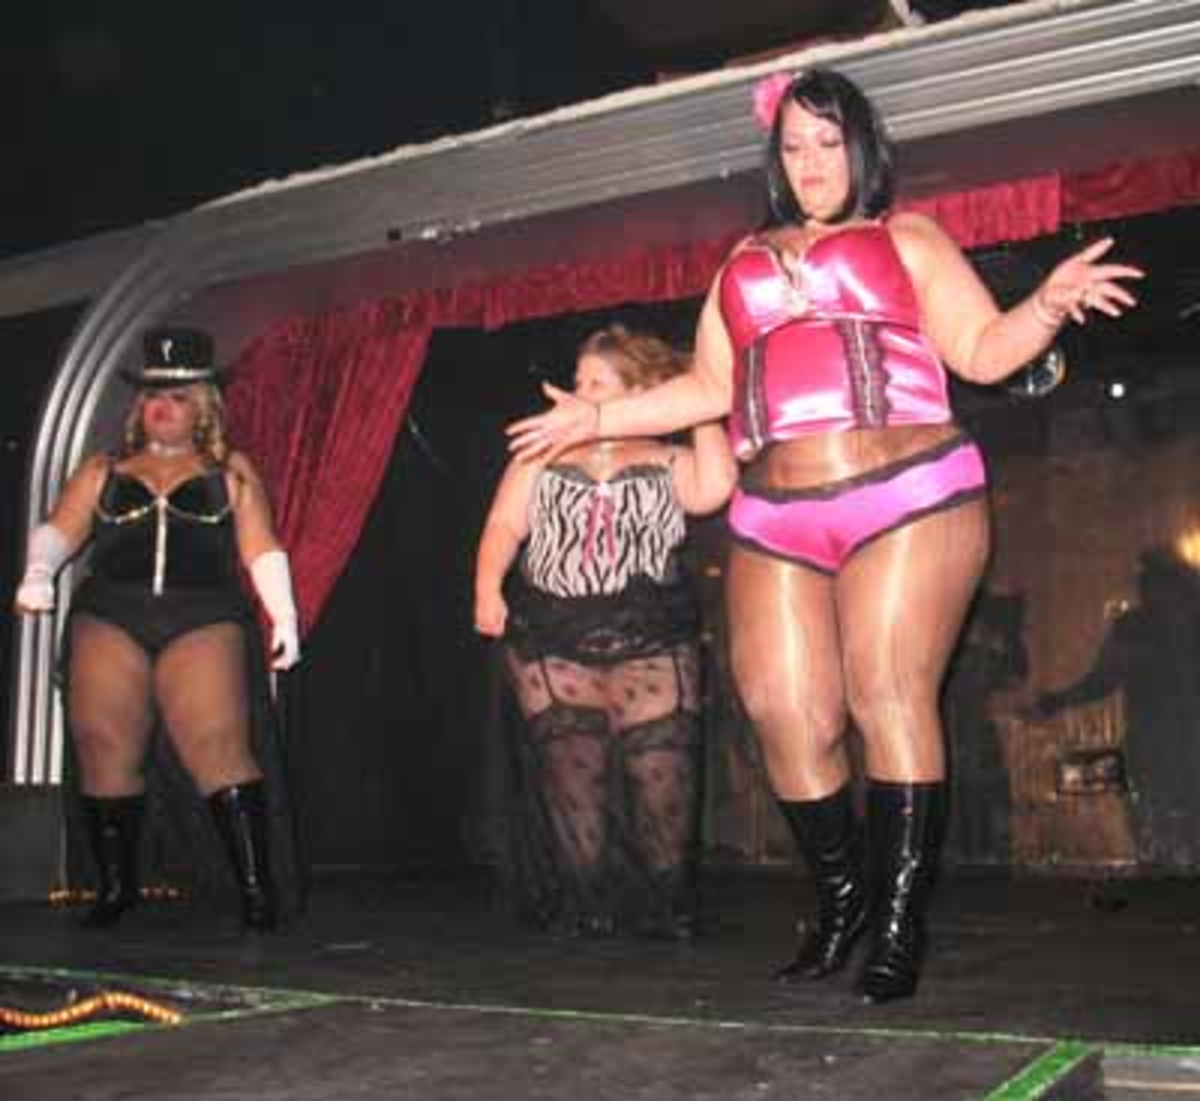 The ladies of Club Rubenesque on stage at the Honey Pot.